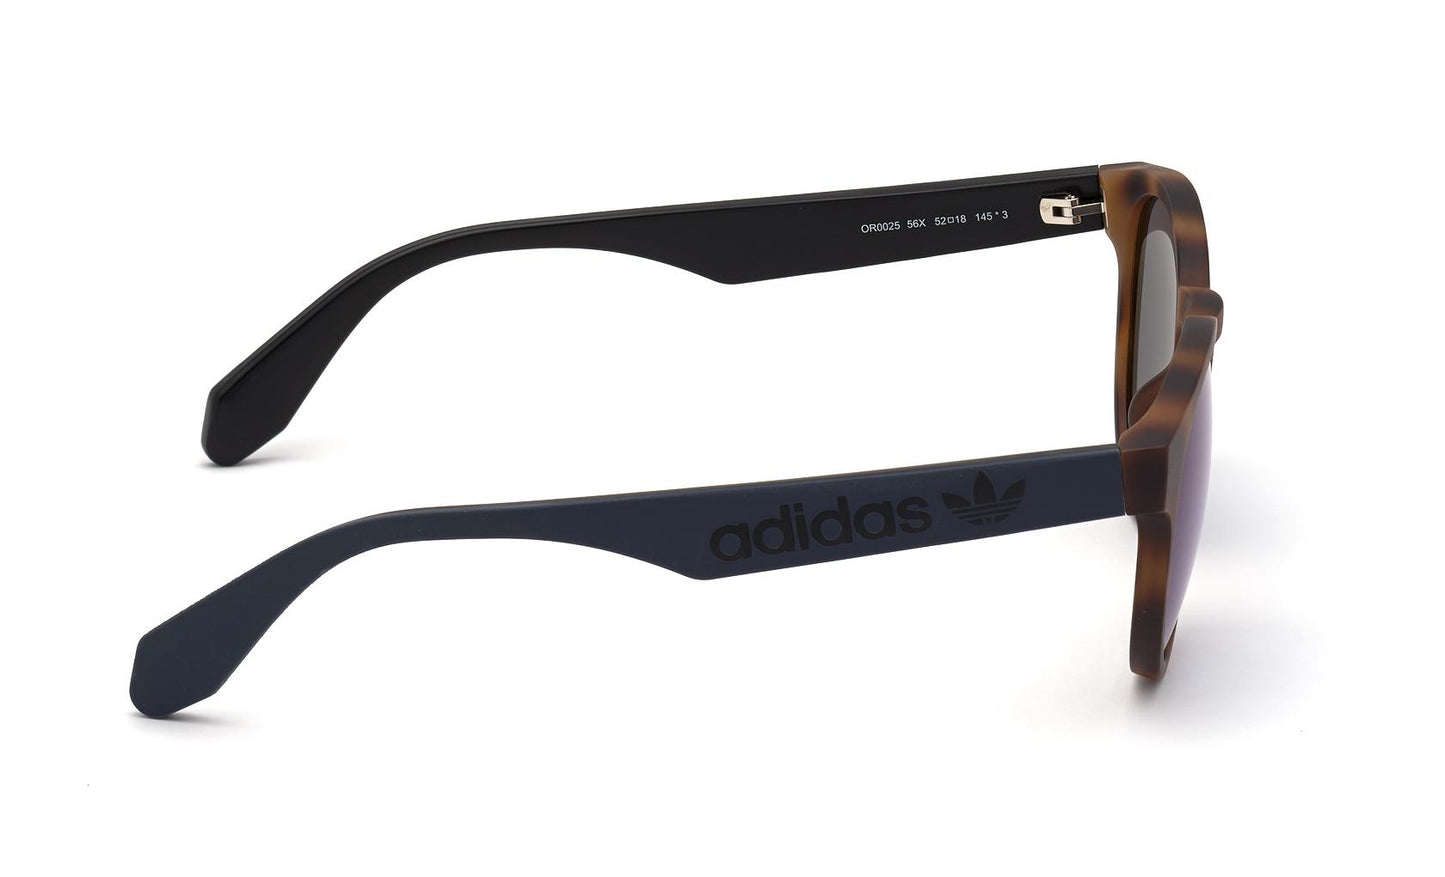 Load image into Gallery viewer, Adidas Originals Sunglasses OR0025 56X
